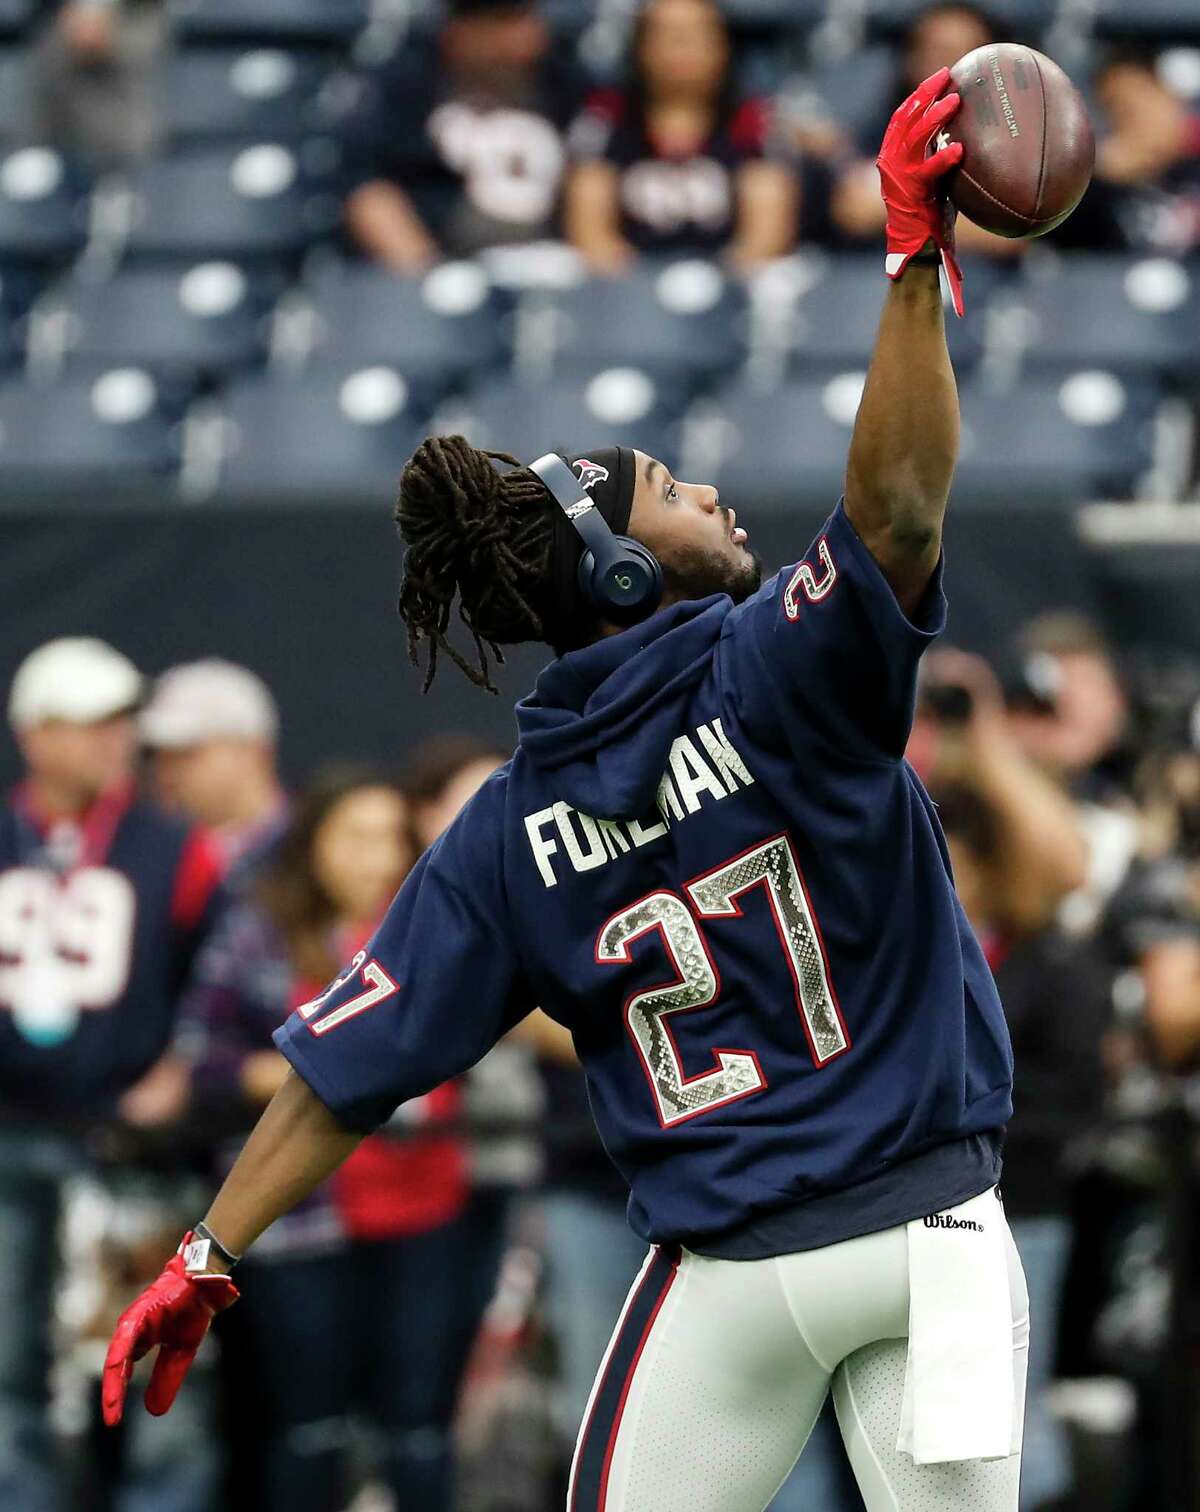 Houston Texans running back D'Onta Foreman (27) reaches out to catch a football before an NFL first round playoff game against the Indianapolis Colts at NRG Stadium on Saturday, Jan. 5, 2019, in Houston.